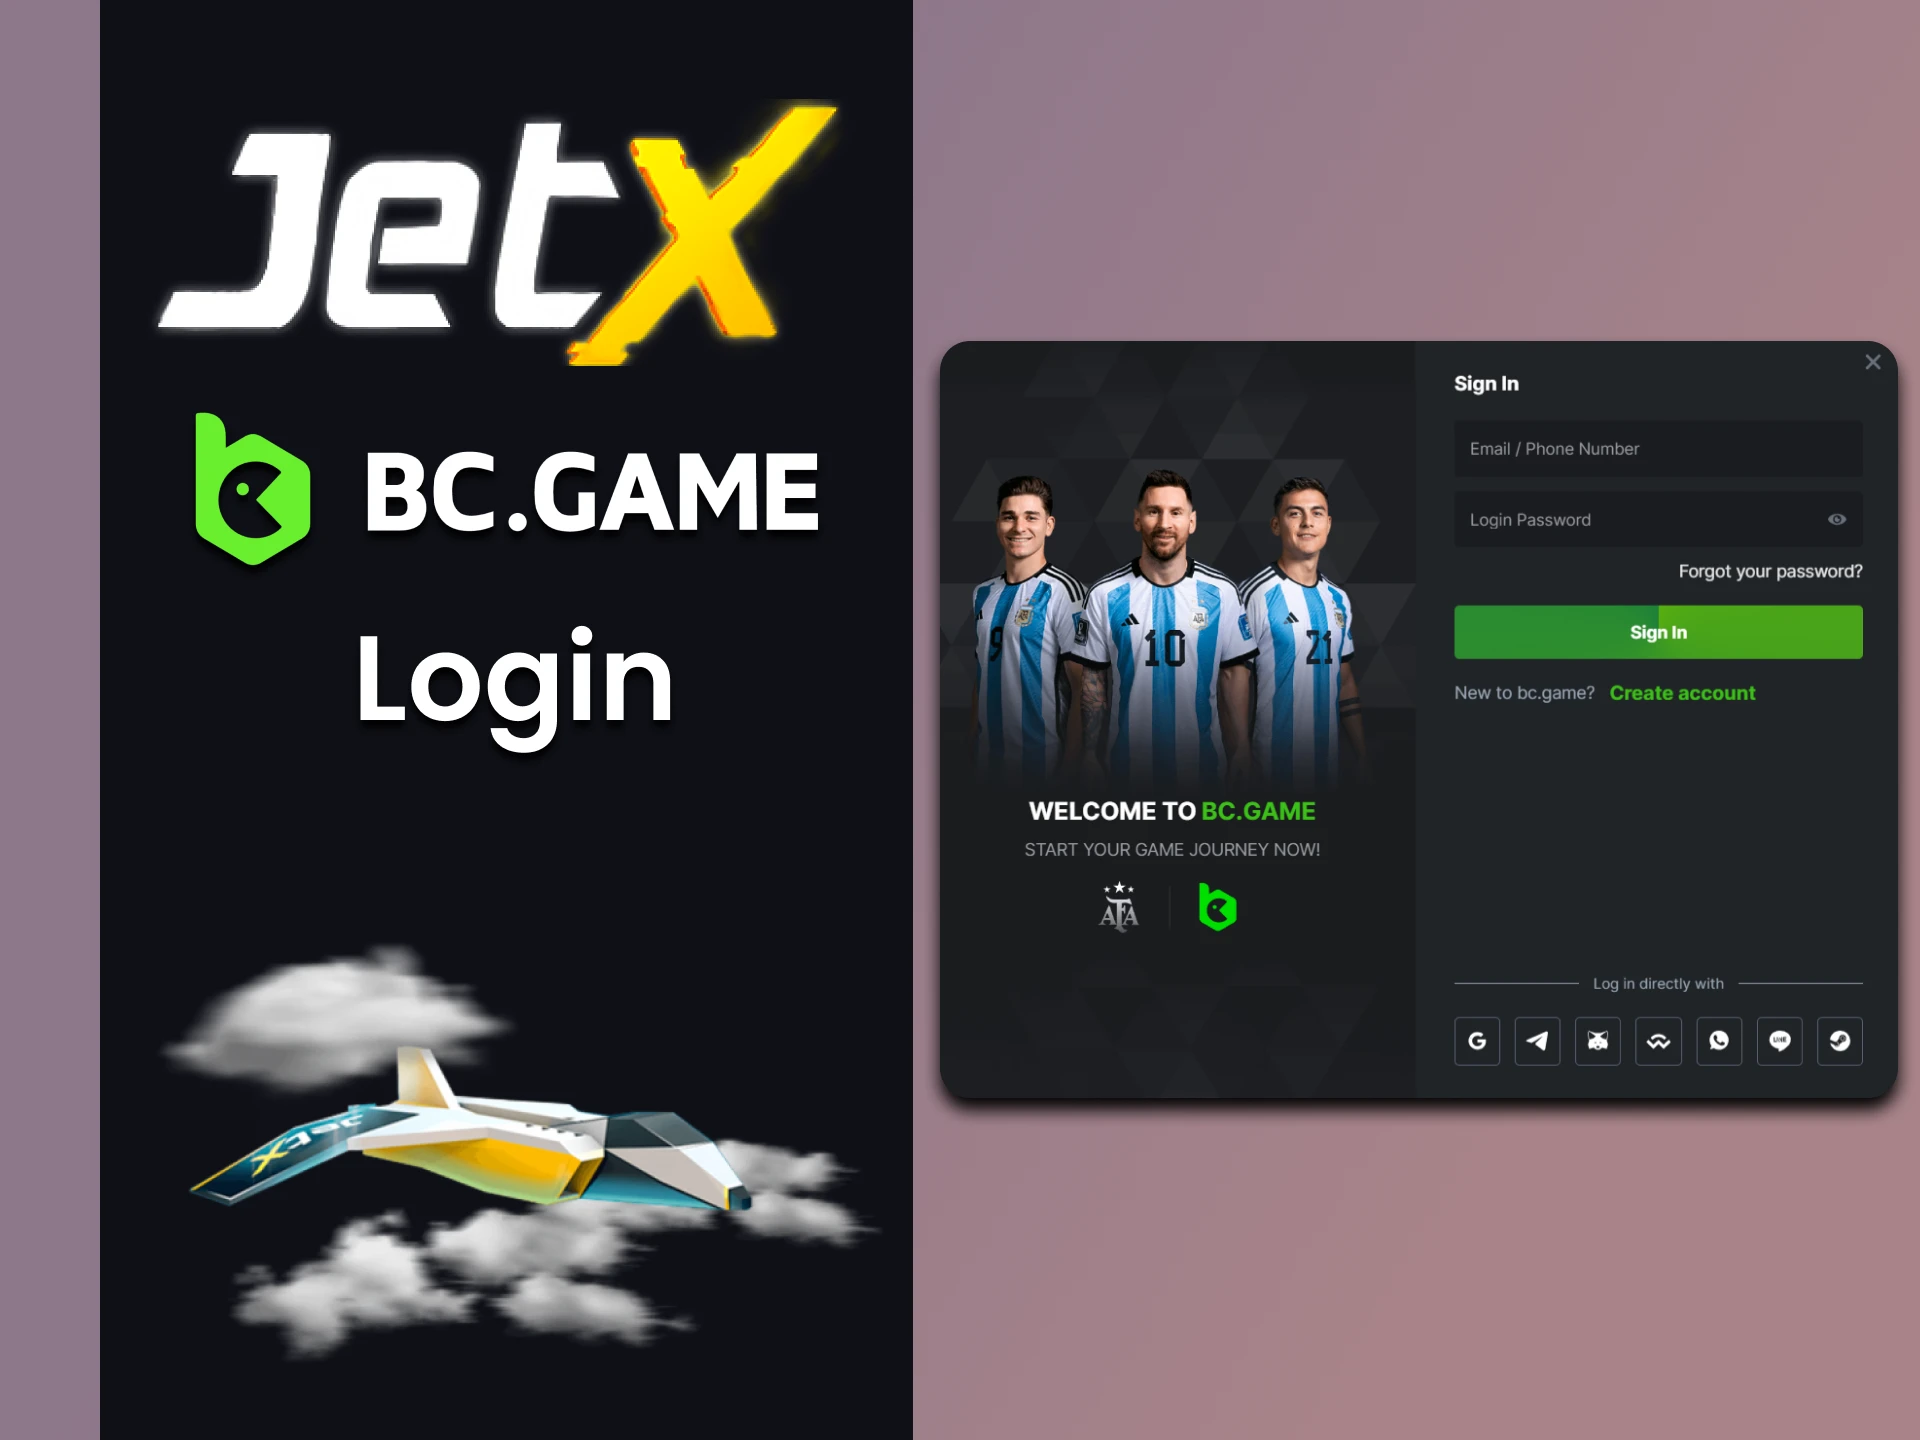 Log in to your personal BC Game account to play JetX.